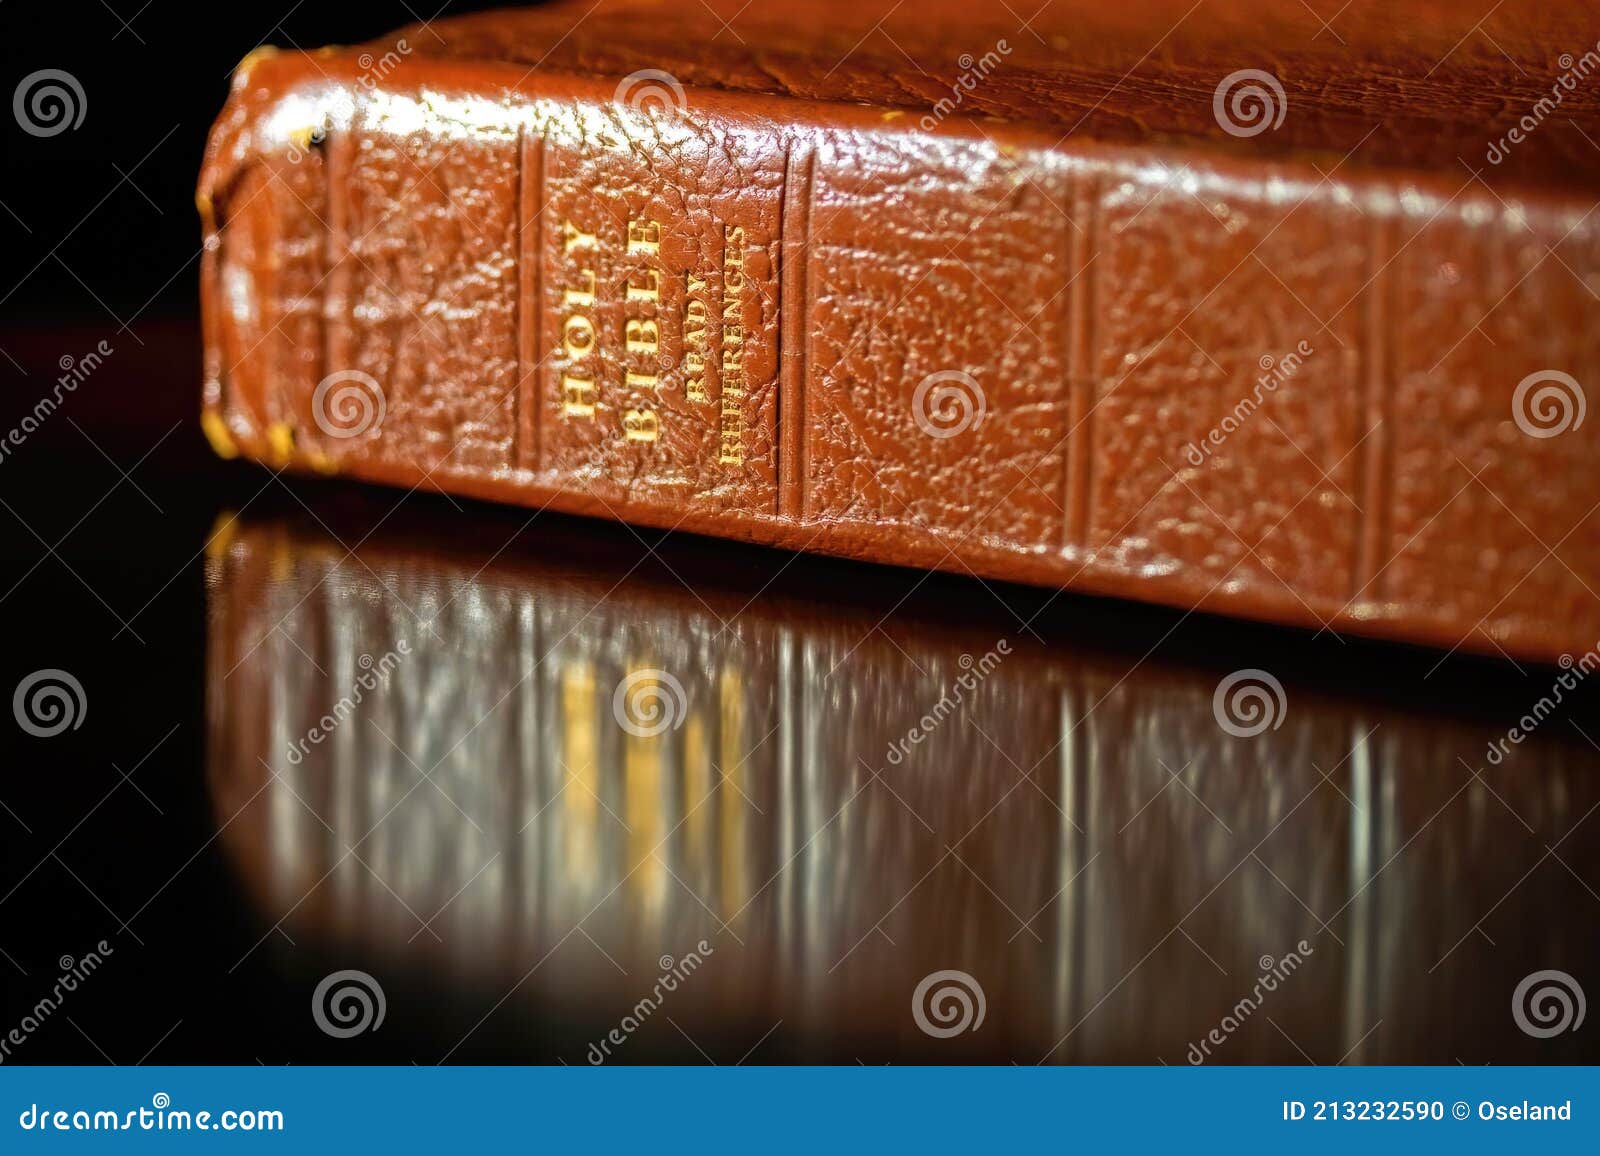 brown leather holy bible with reflection in table top.